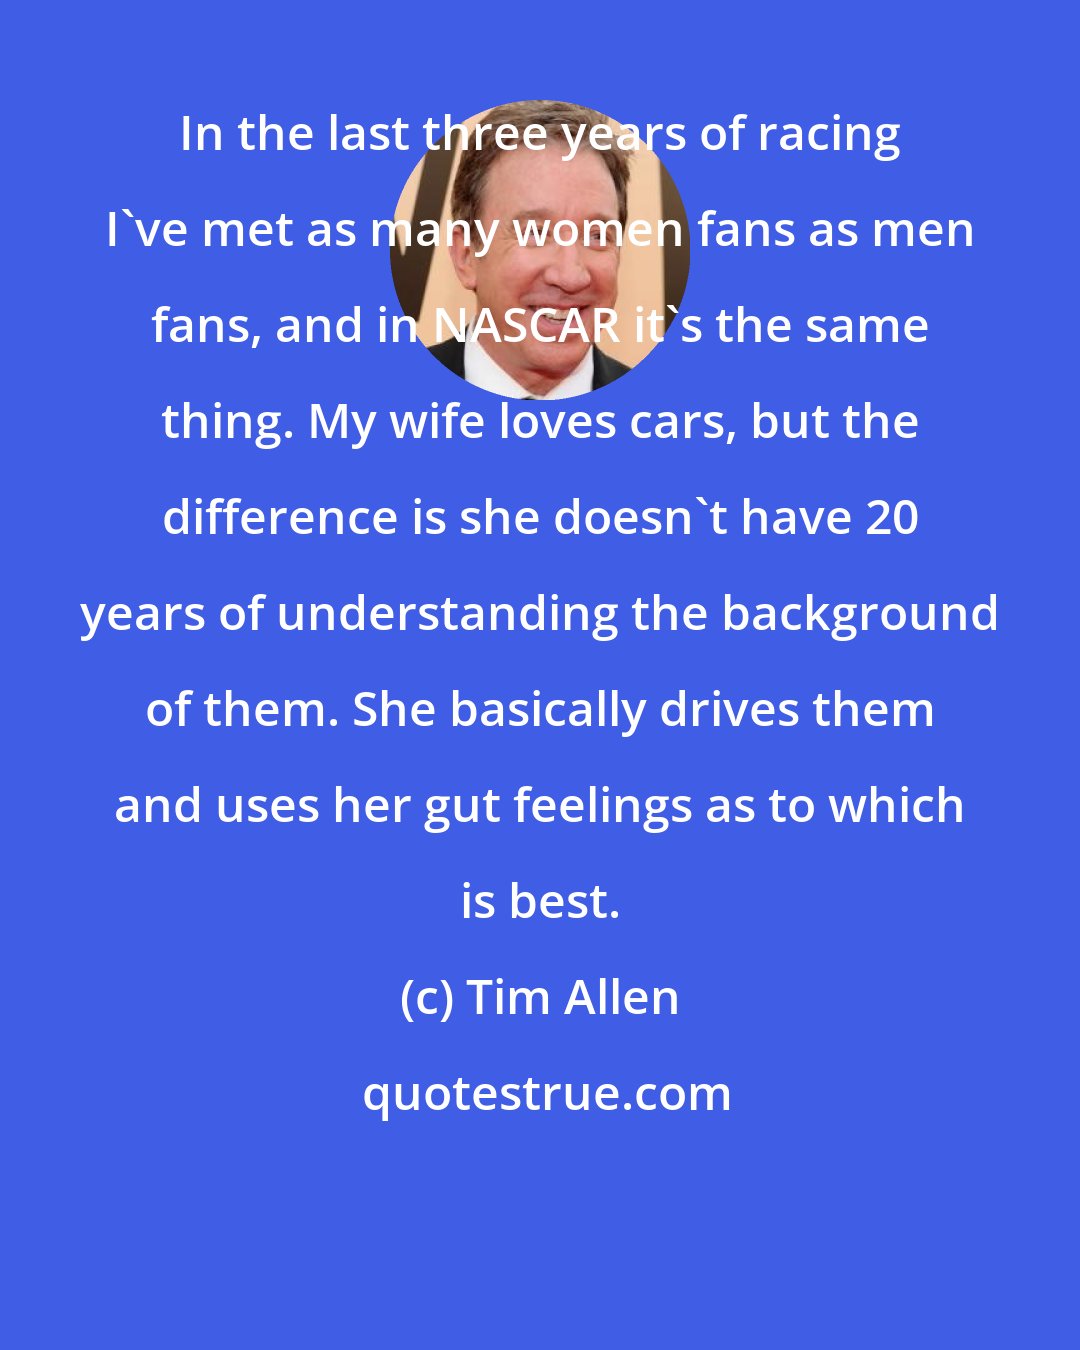 Tim Allen: In the last three years of racing I've met as many women fans as men fans, and in NASCAR it's the same thing. My wife loves cars, but the difference is she doesn't have 20 years of understanding the background of them. She basically drives them and uses her gut feelings as to which is best.